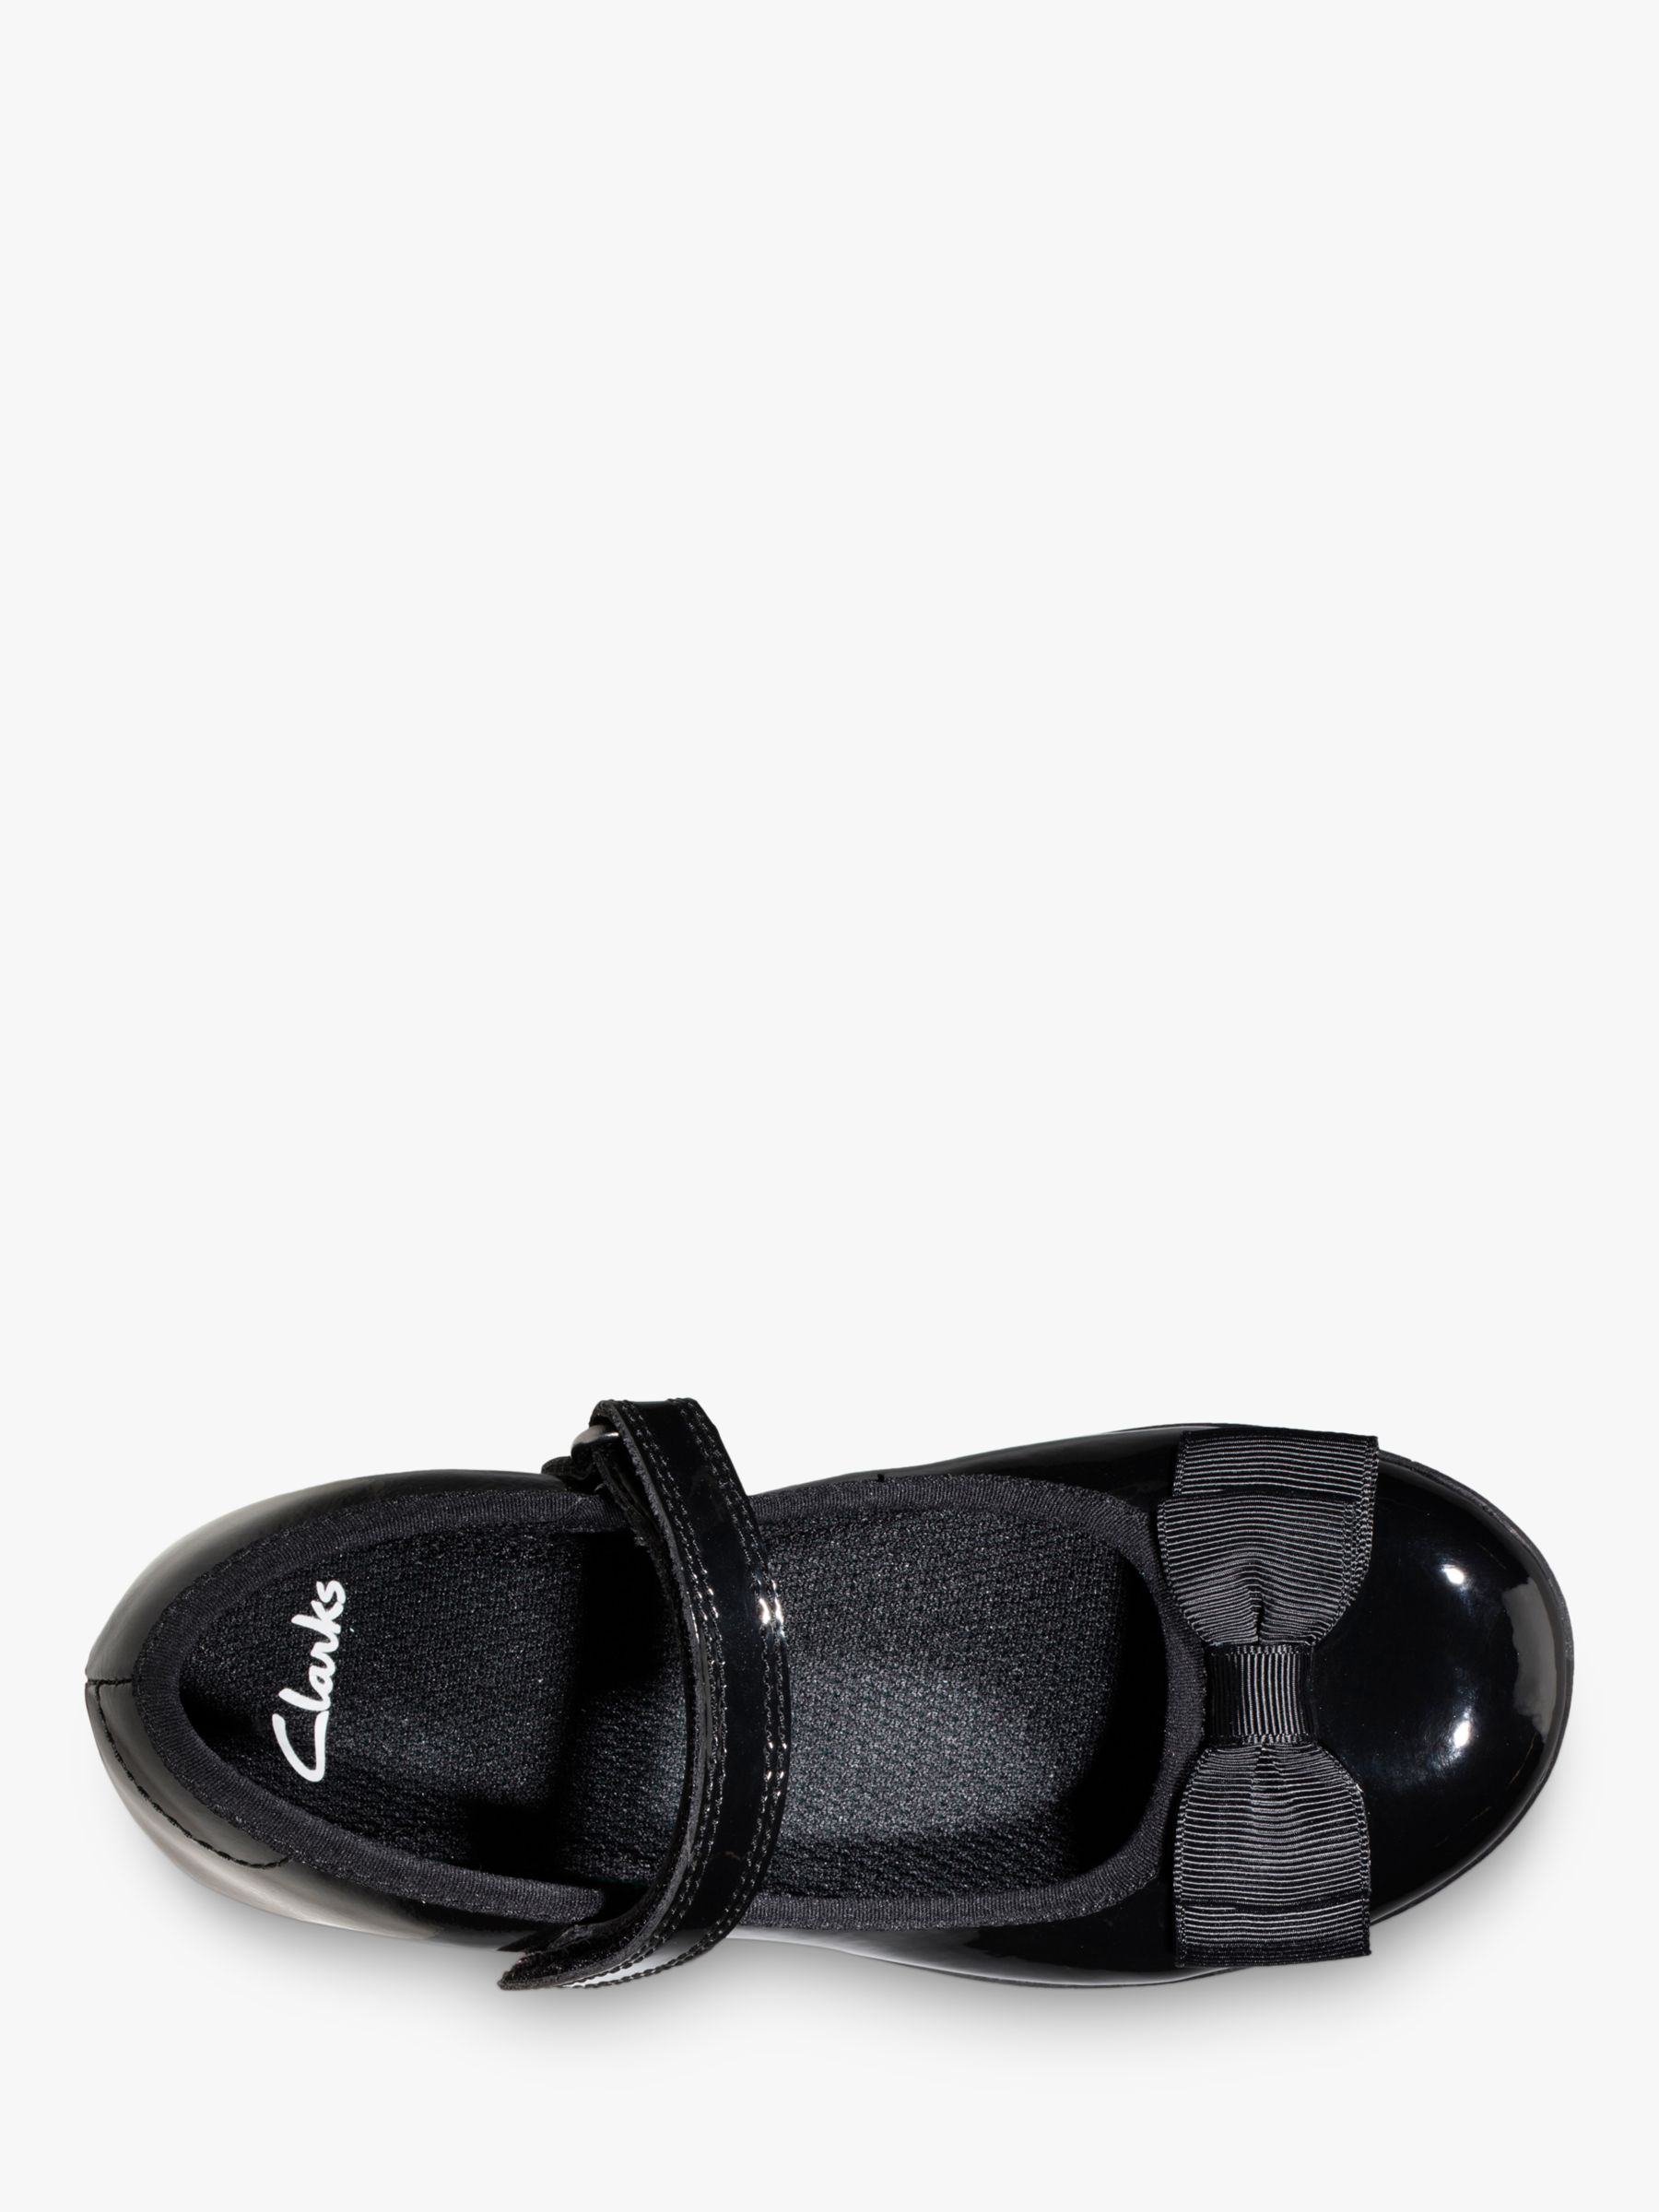 Buy Clarks Kids' Scala Tap Mary Jane School Shoes Online at johnlewis.com